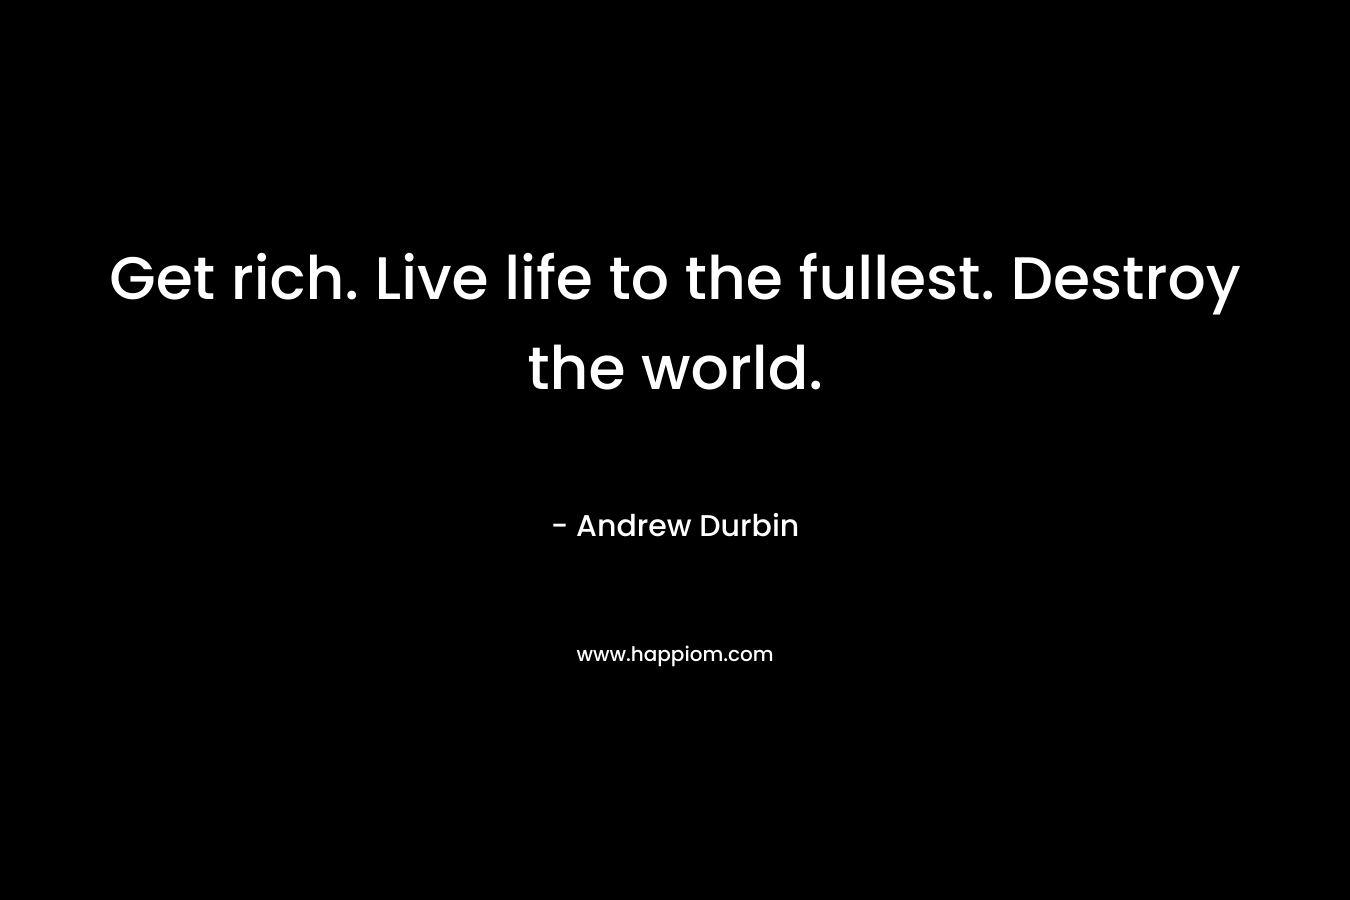 Get rich. Live life to the fullest. Destroy the world.